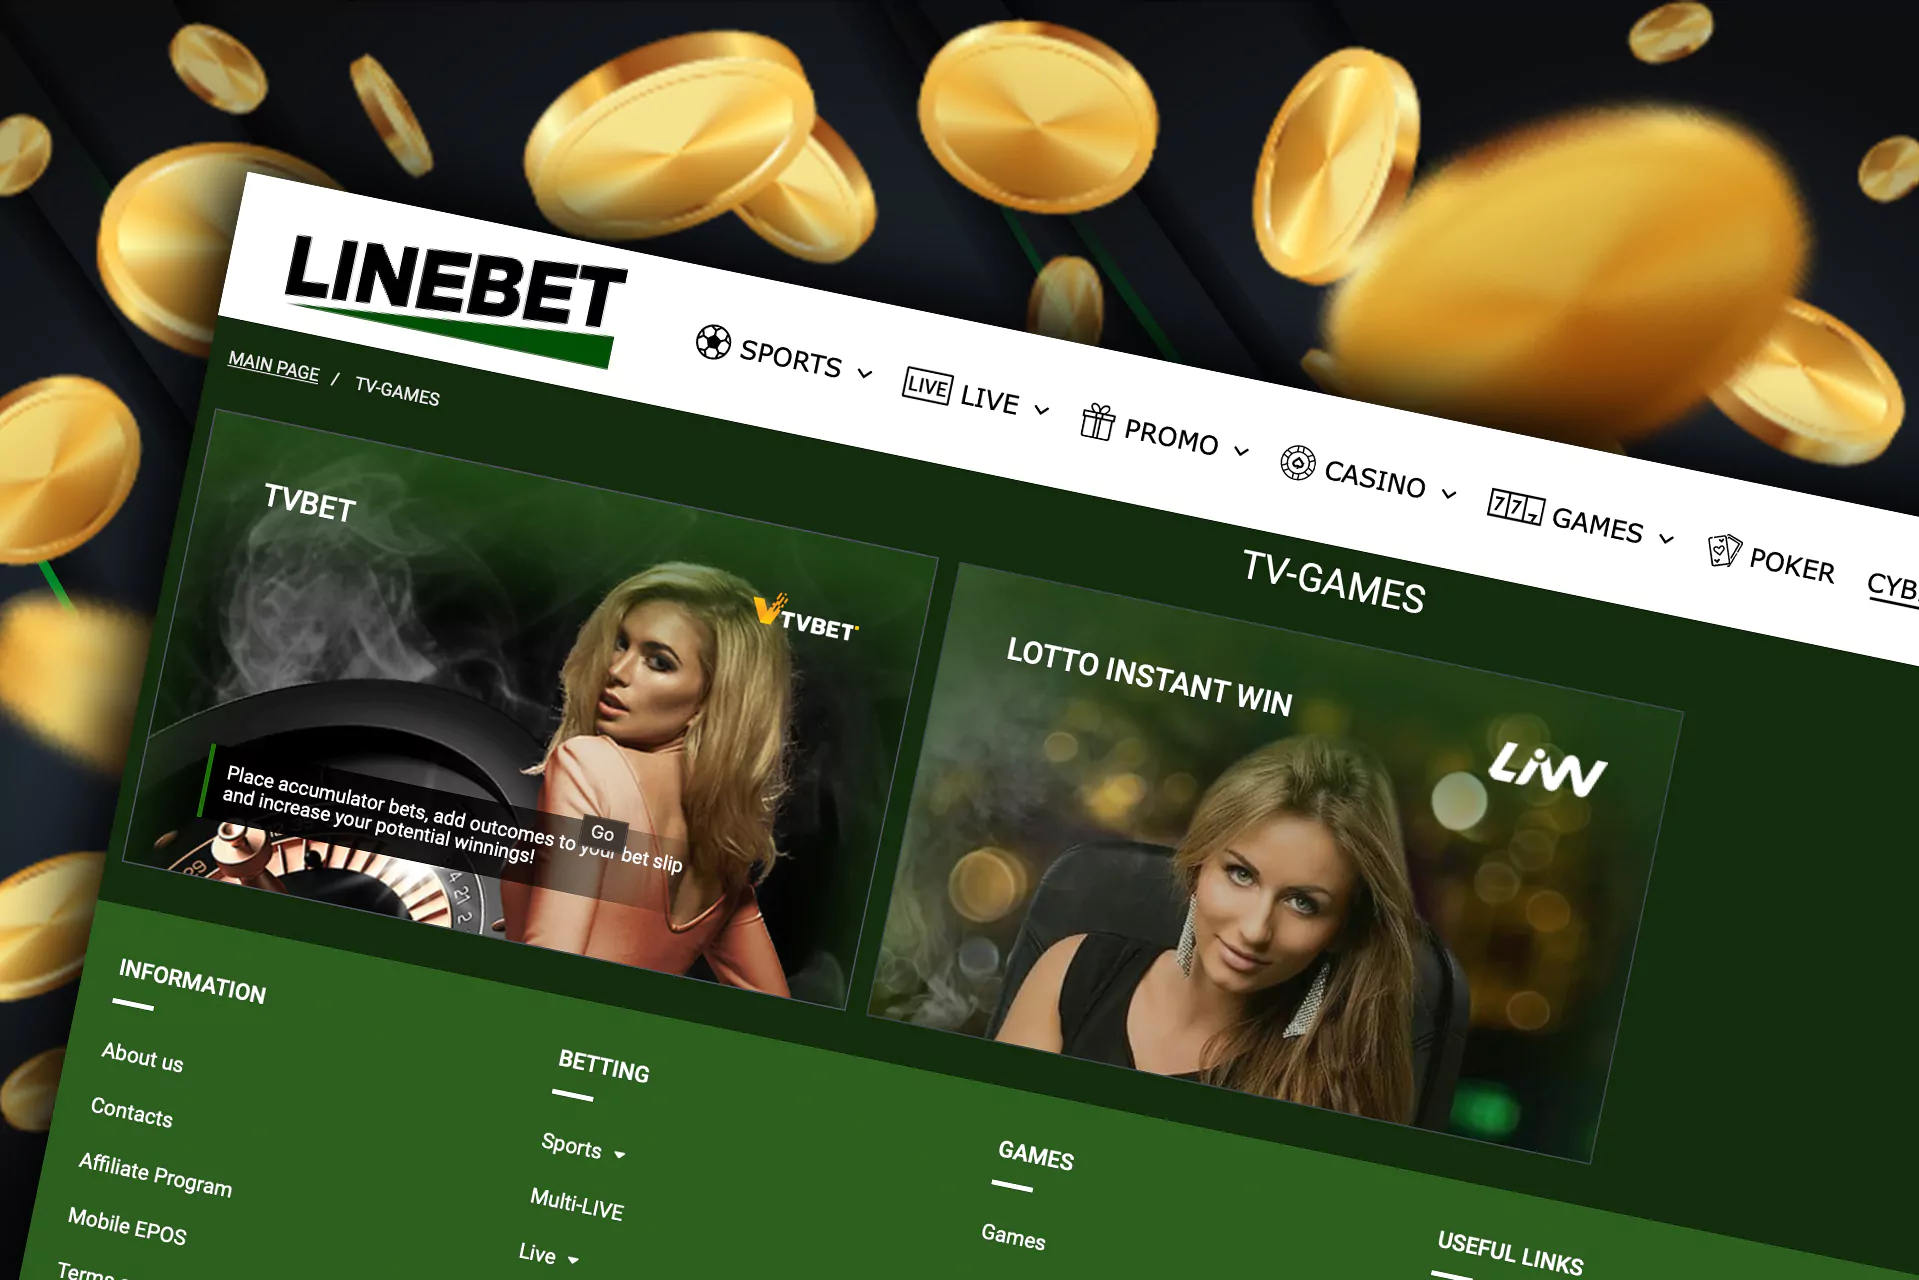 Visit this section to get additional fun and new experience in casino.